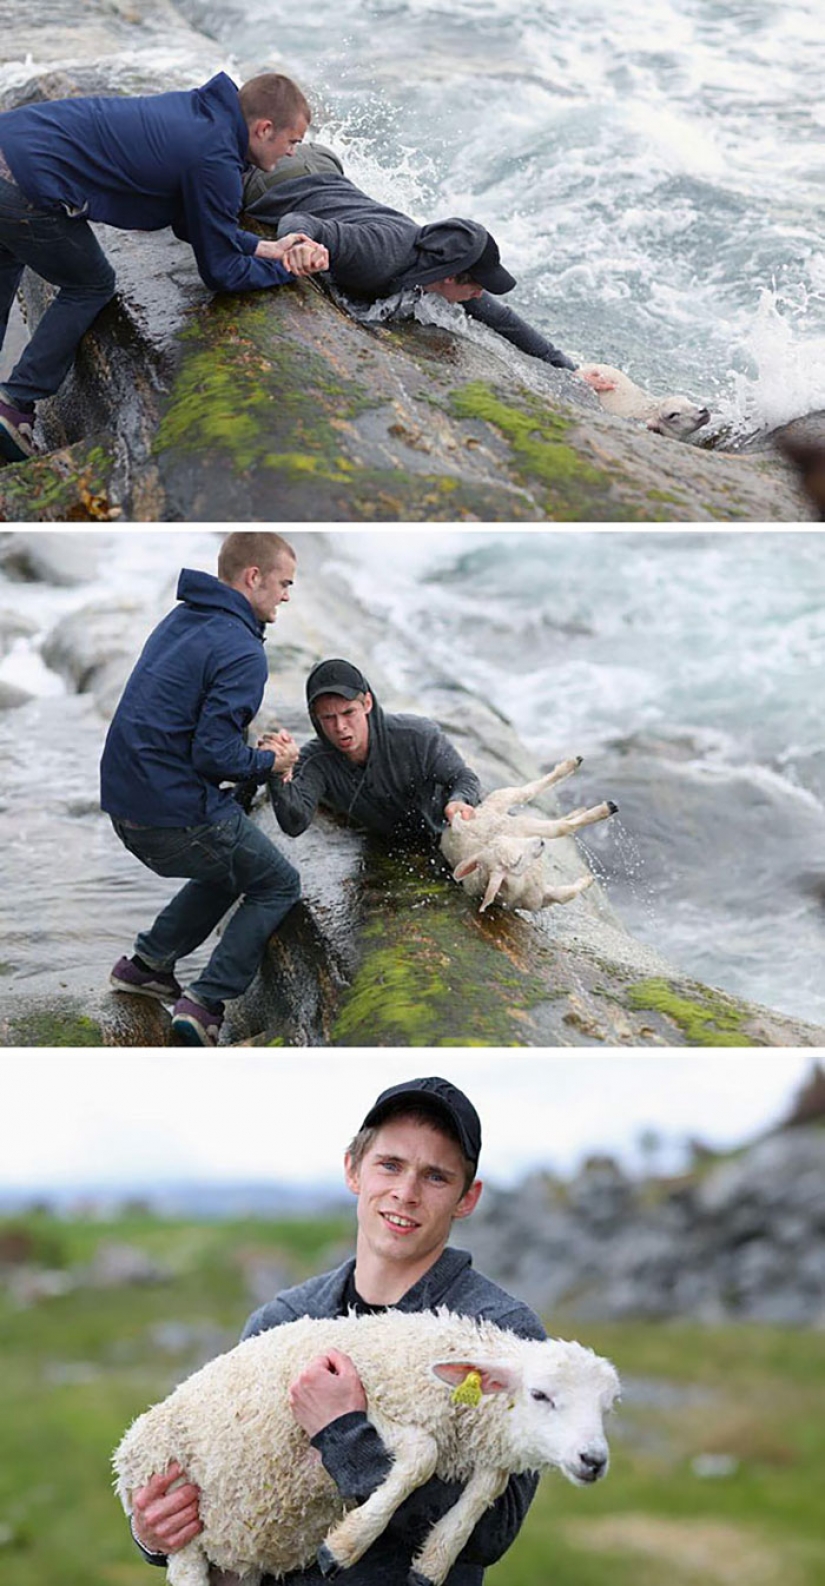 These photos will restore your faith in humanity.